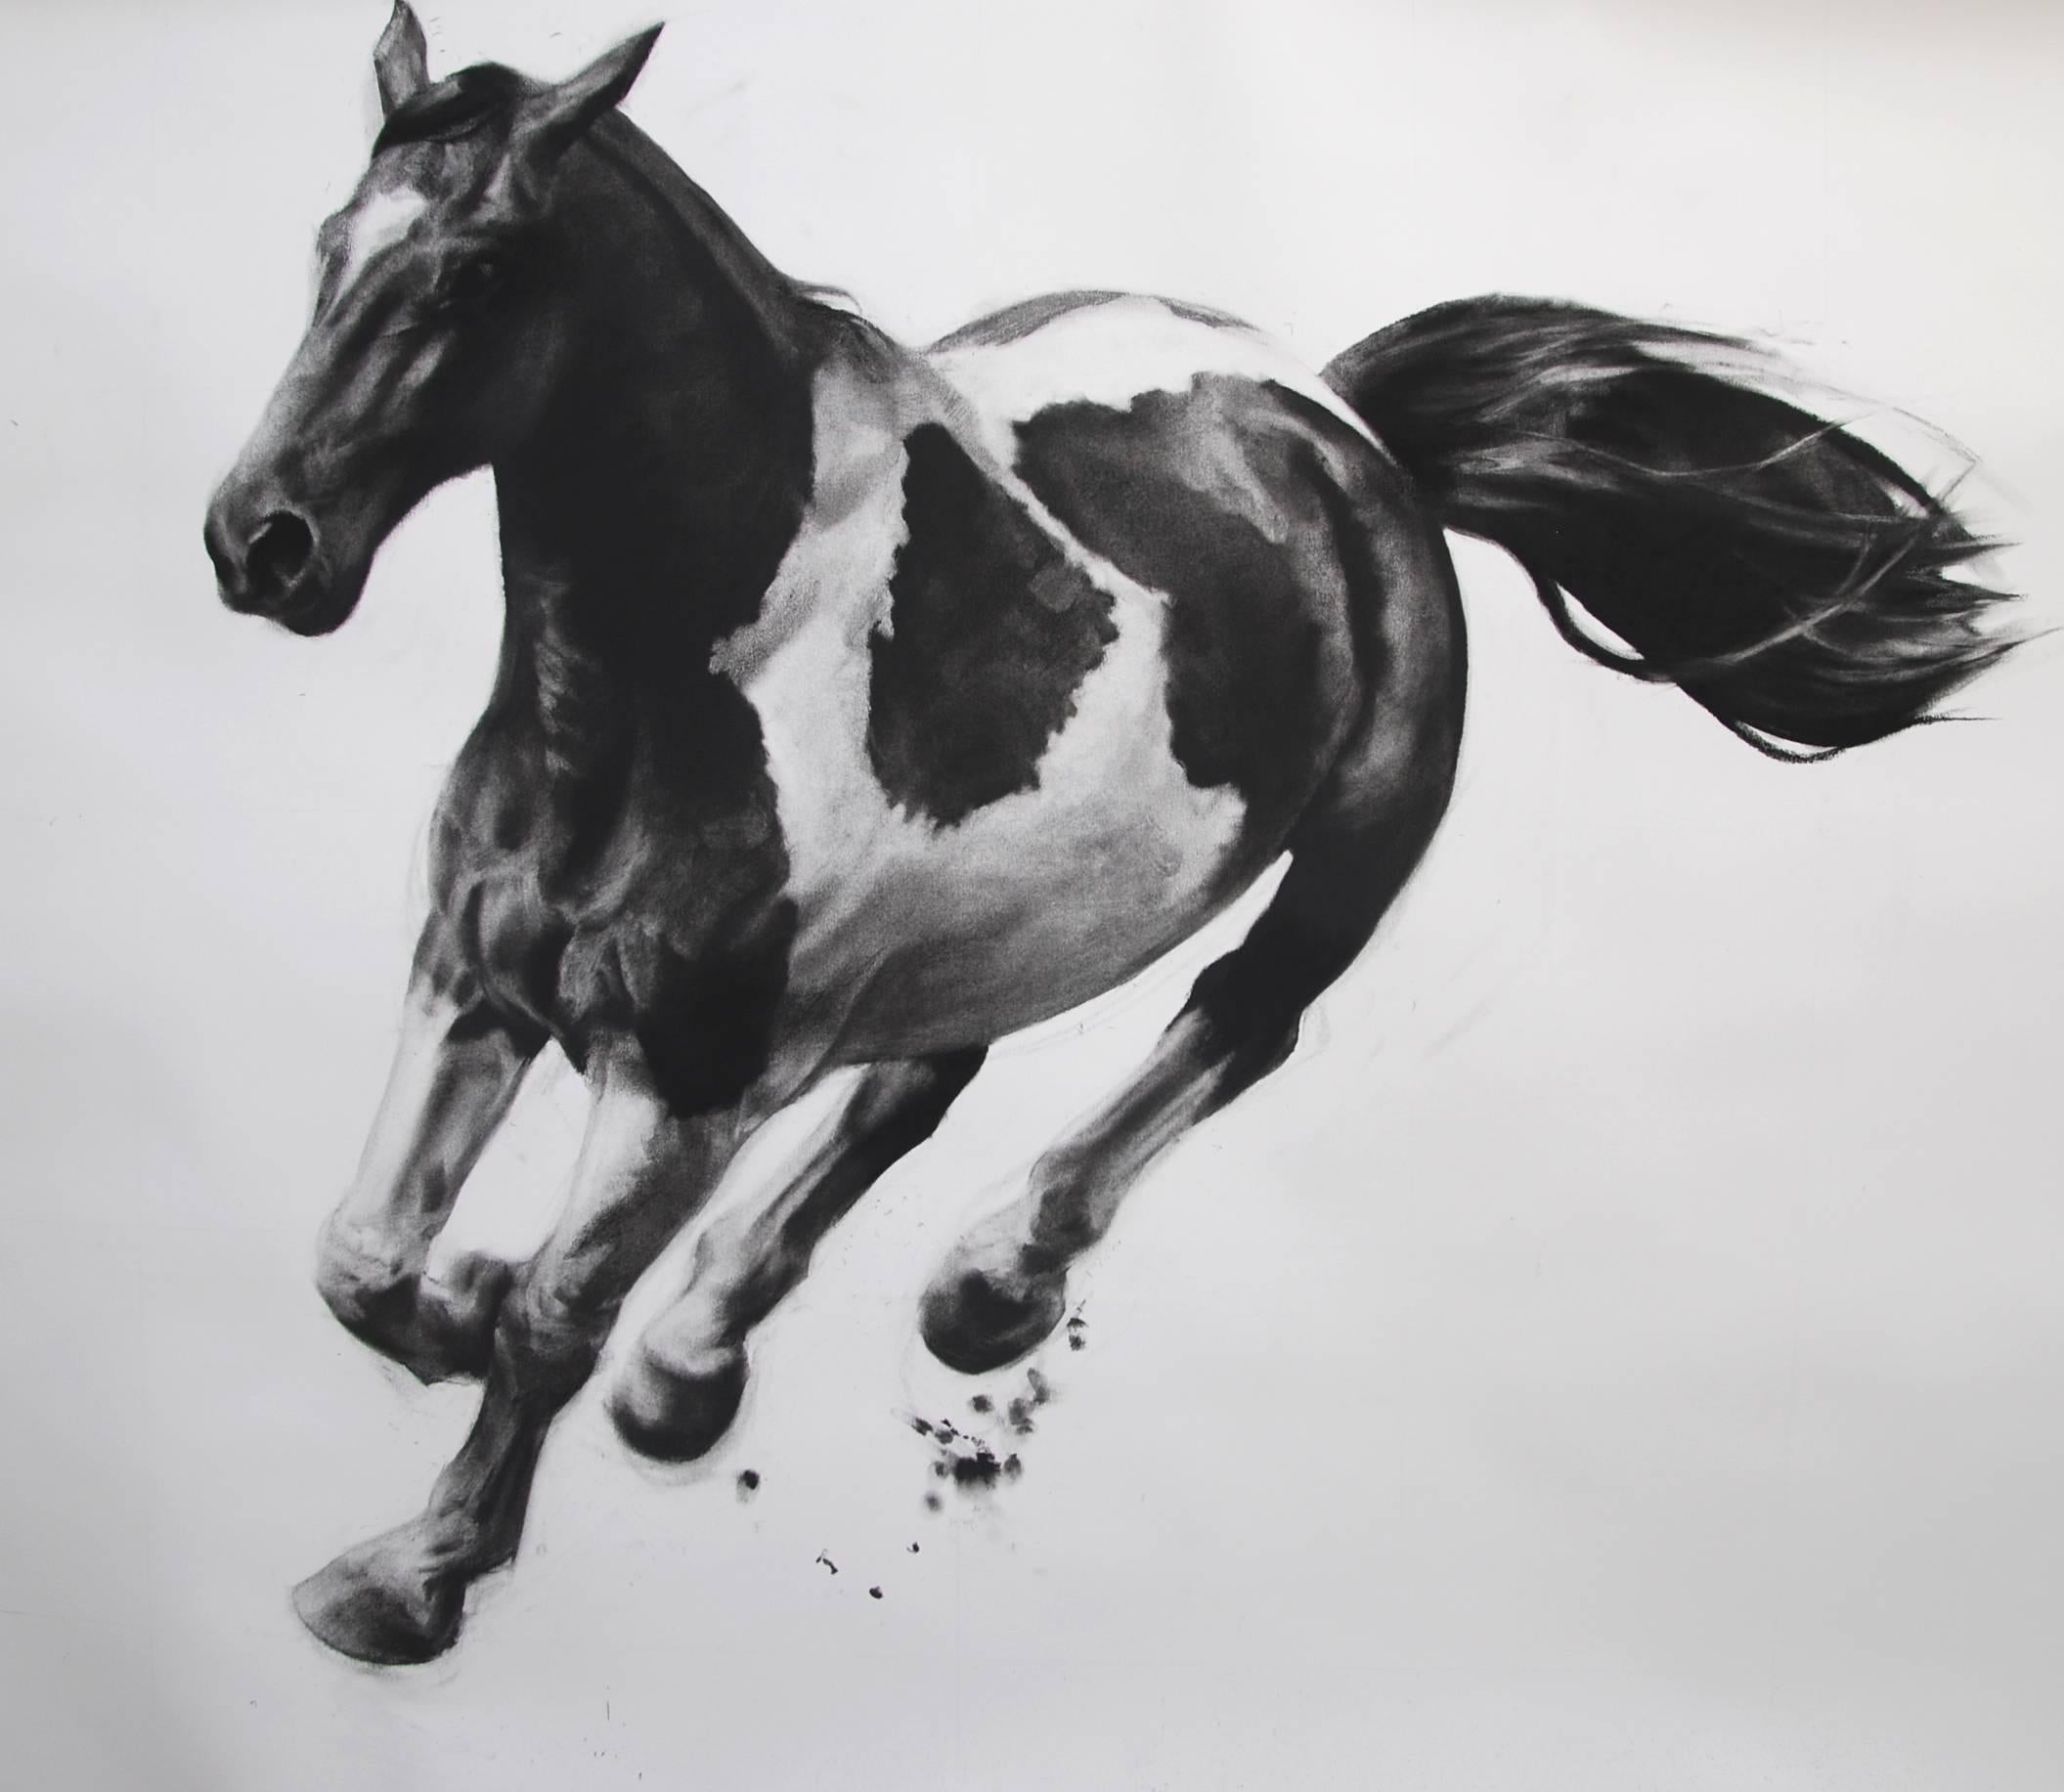 Scottish artist Patsy McArthur explores the grace and power of human movement in her naturalistic drawings and paintings. Her latest works, including small ink studies, charcoal and graphite drawings, and large oil paintings, convey a palpable sense